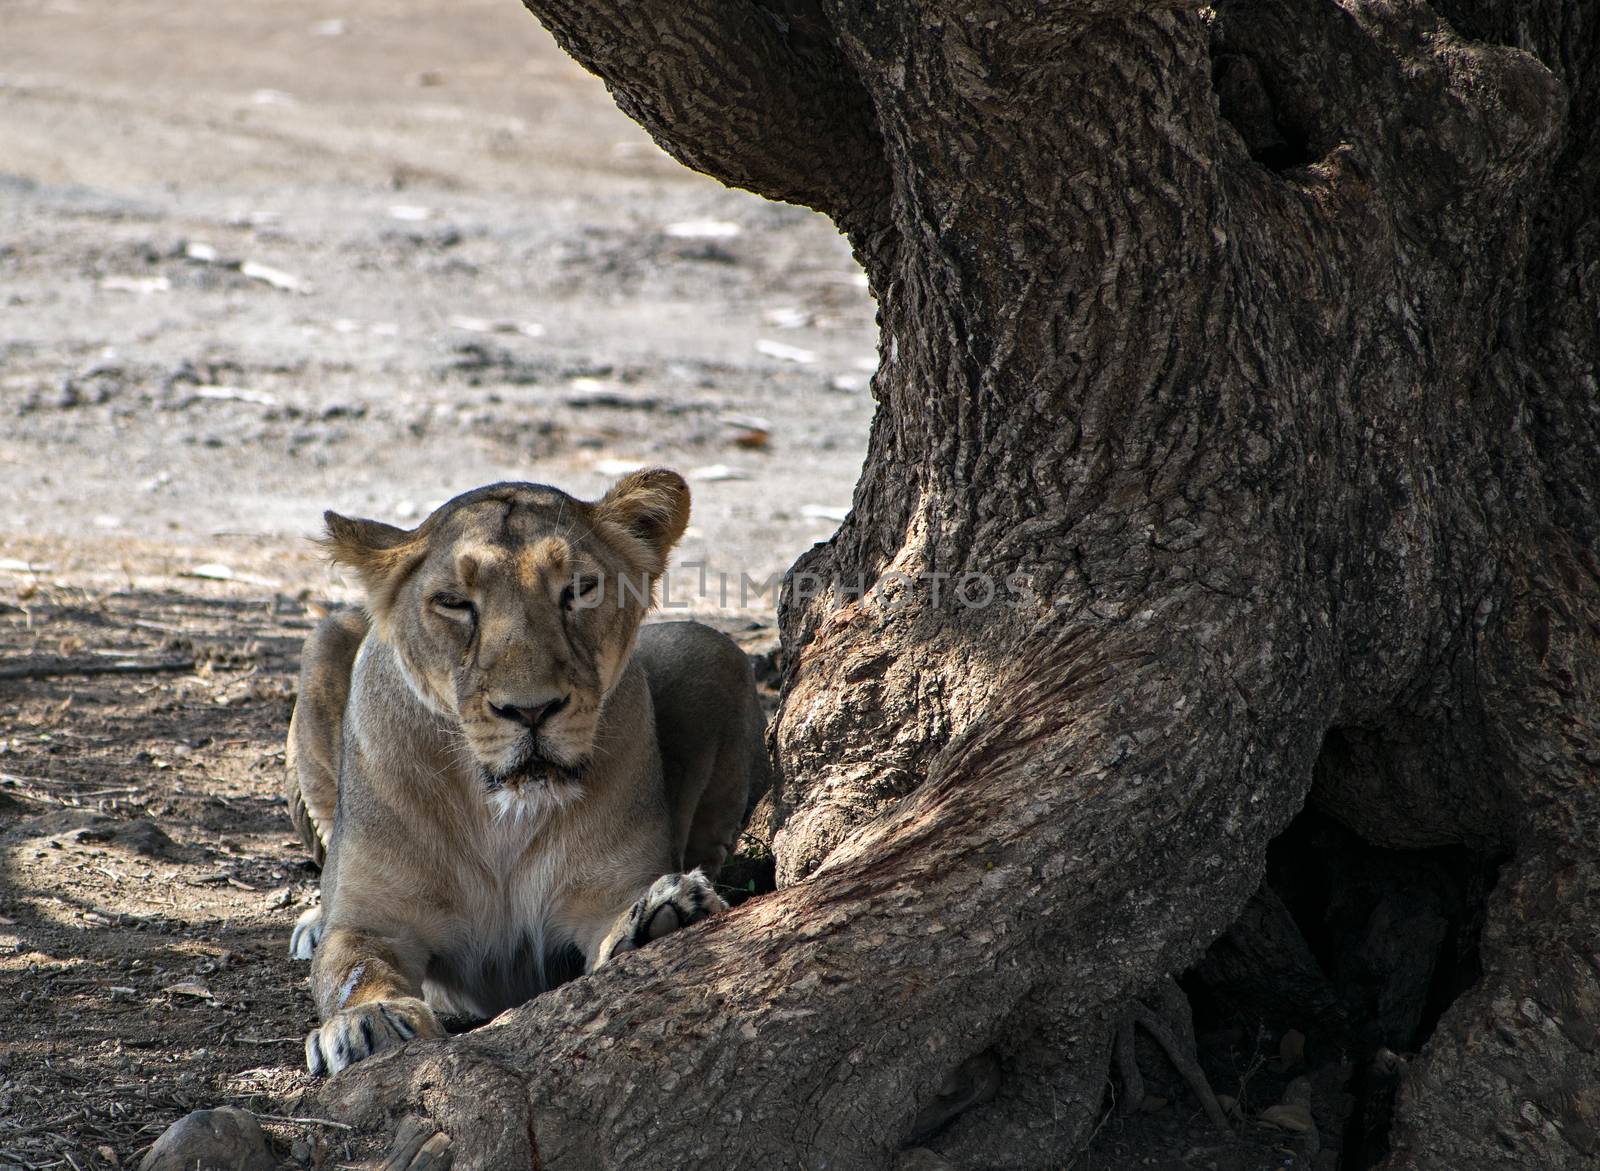 A lioness resting in the shadow of a huge tree in Gir with a giant tree trunk , Gujrat, India.